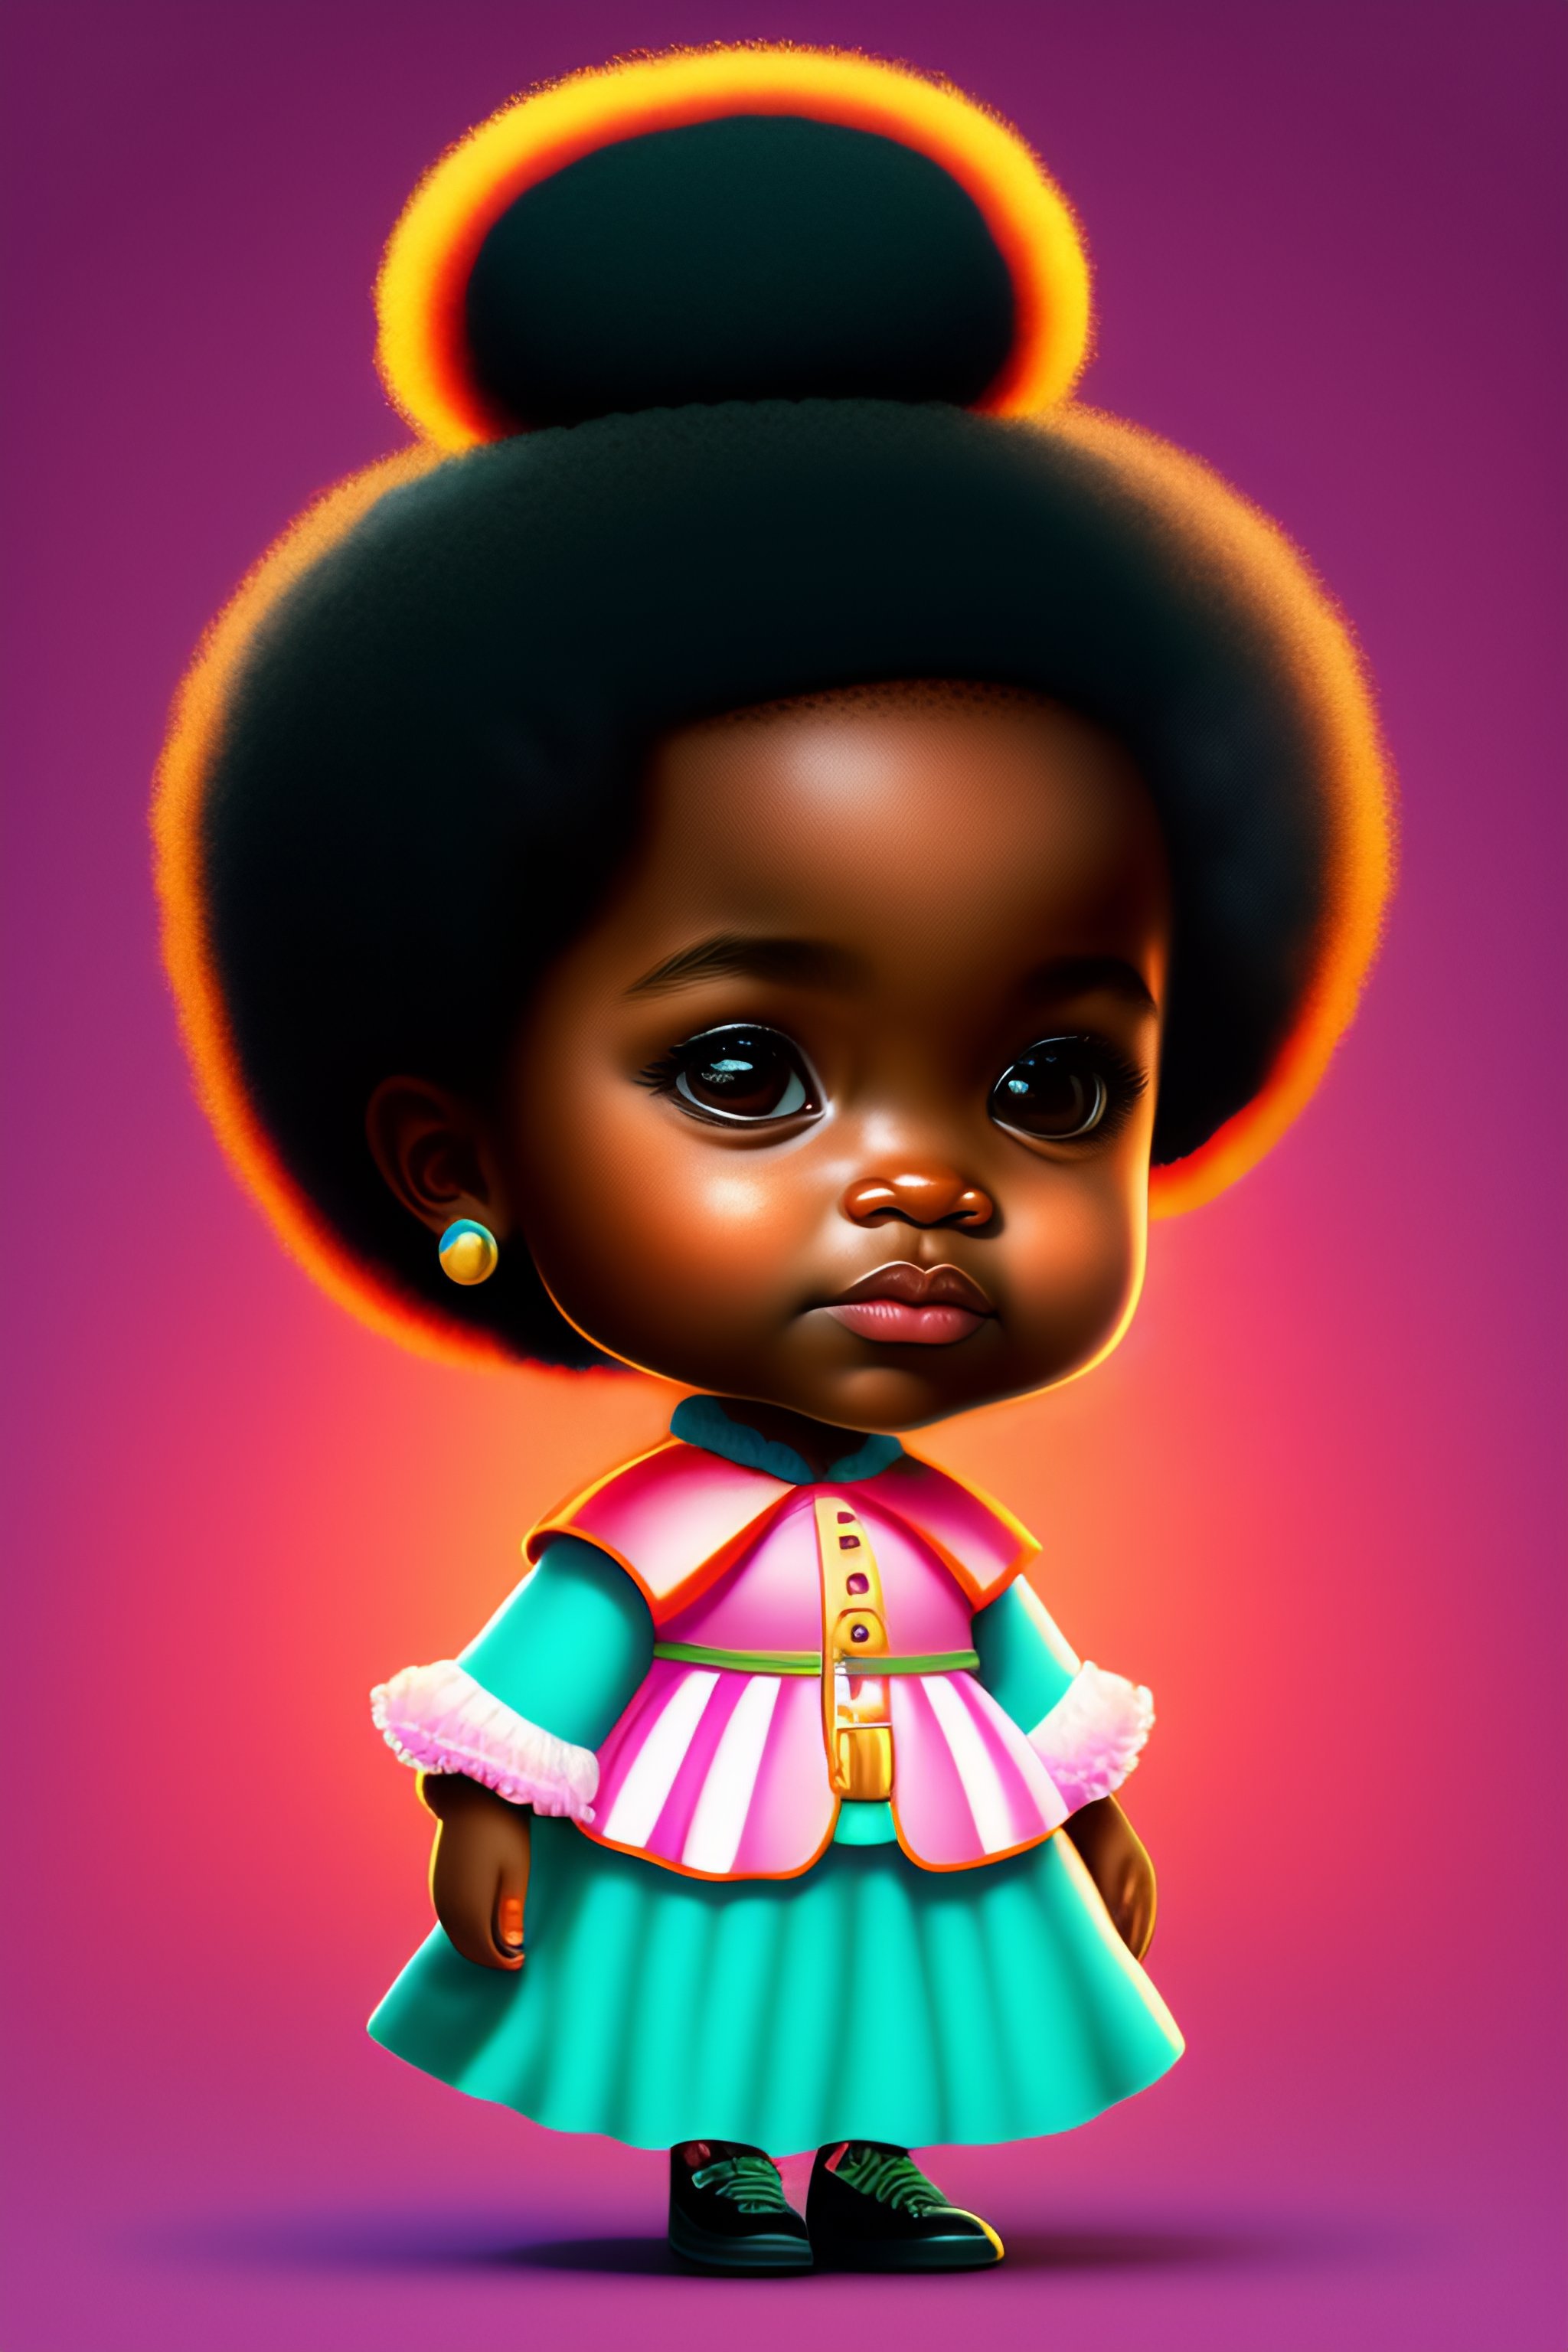 Lexica - Afro puffs, baby, cute African-American history 4k cartooned